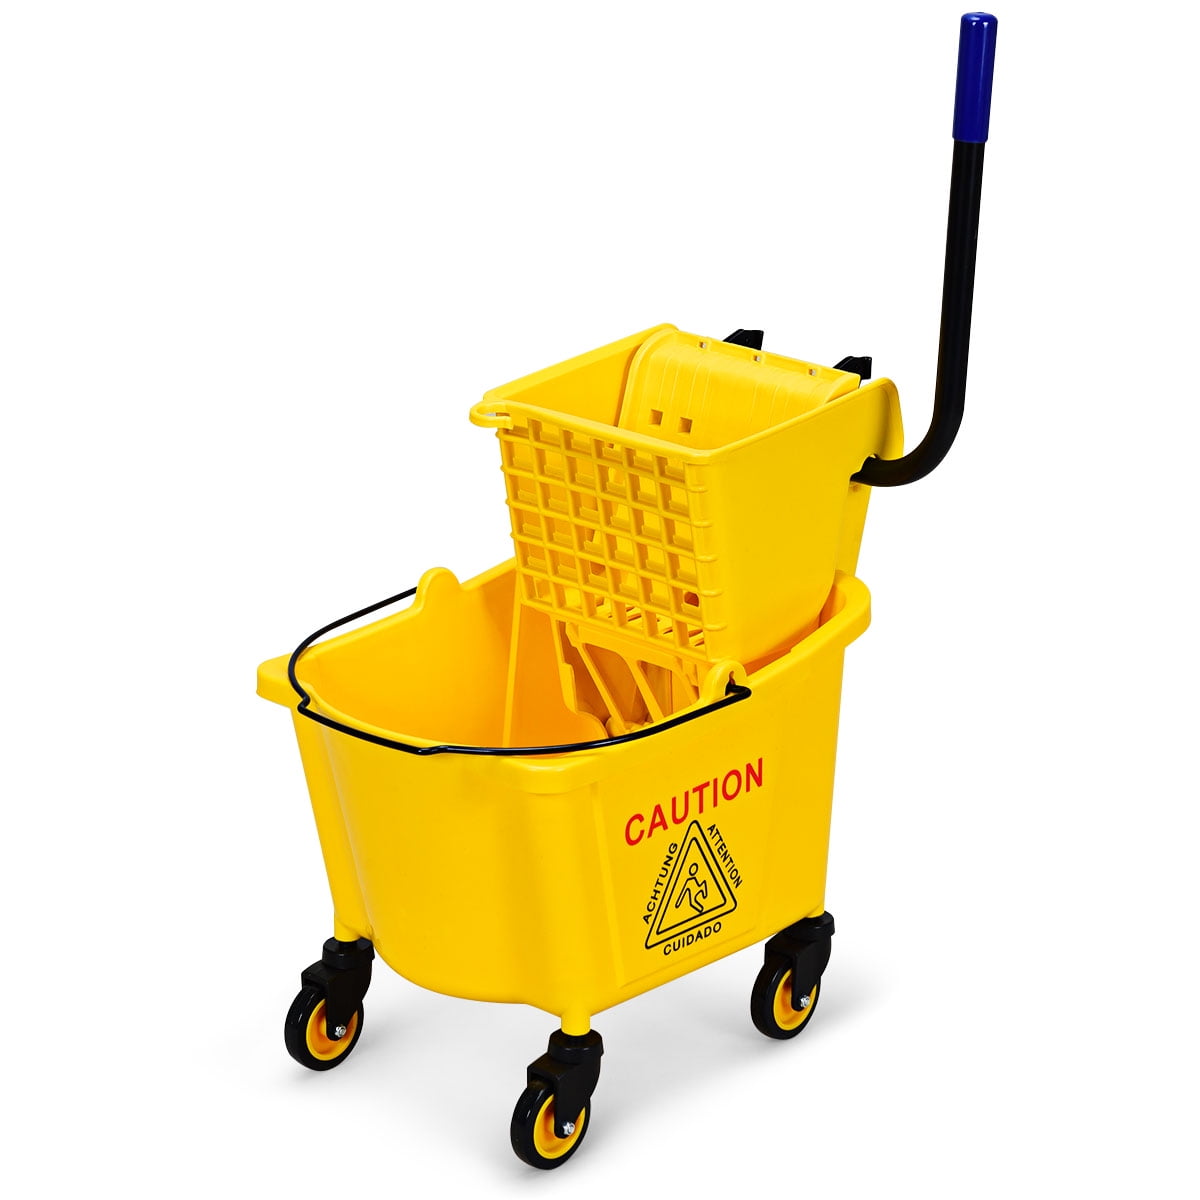 5.28 Removable Gallon Mop Bucket Commercial Mop Bucket for Shop Restaurant Hotel Office Yellow 